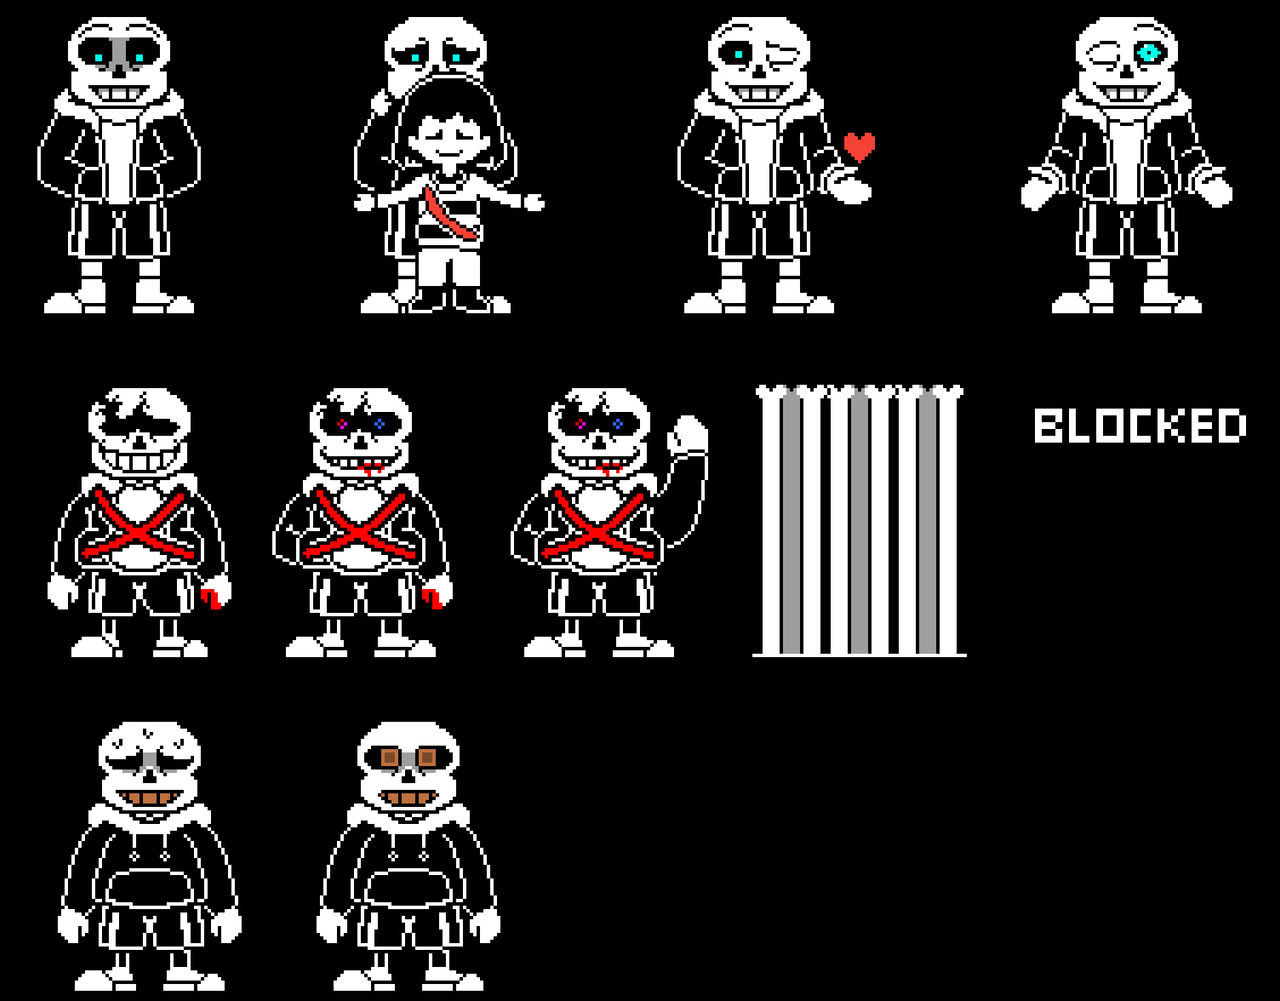 AU] Undertale: Sans Fight The Hard Mode [Phase 1 Completed]